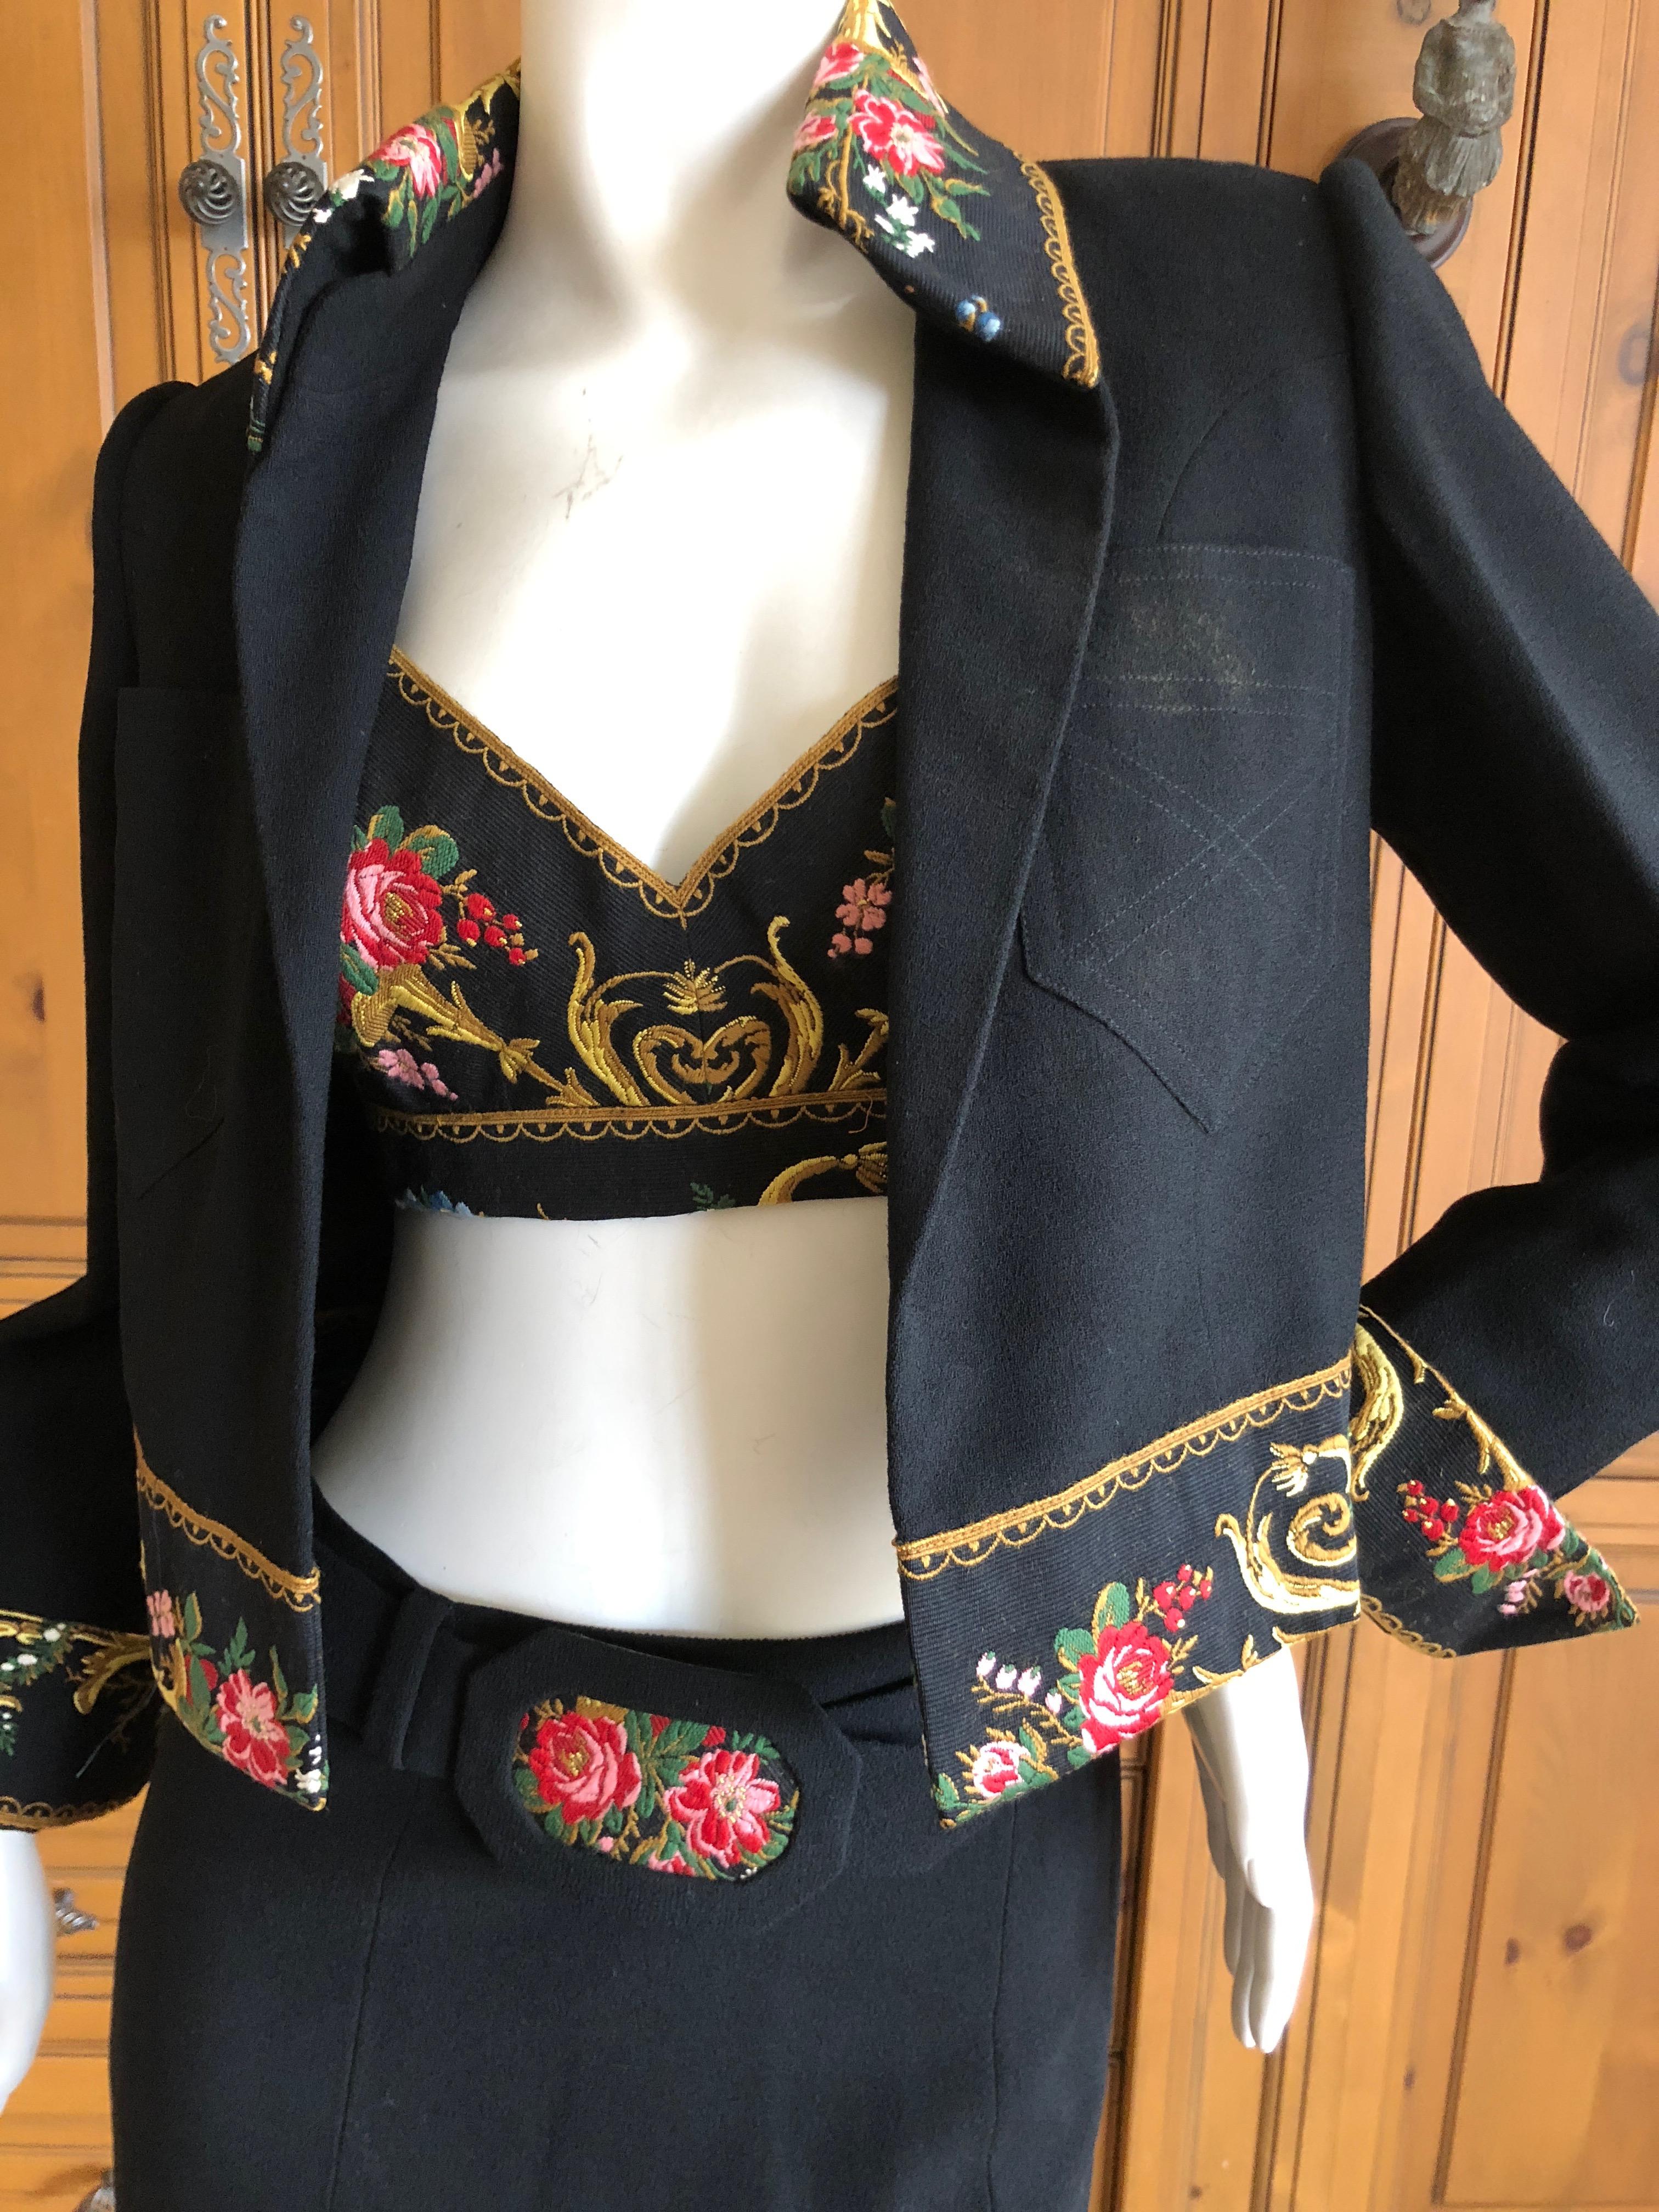 Cardinali Embroidered Black Cotton Skirt Suit with Midriff Baring Bra Fall 1971  For Sale 4